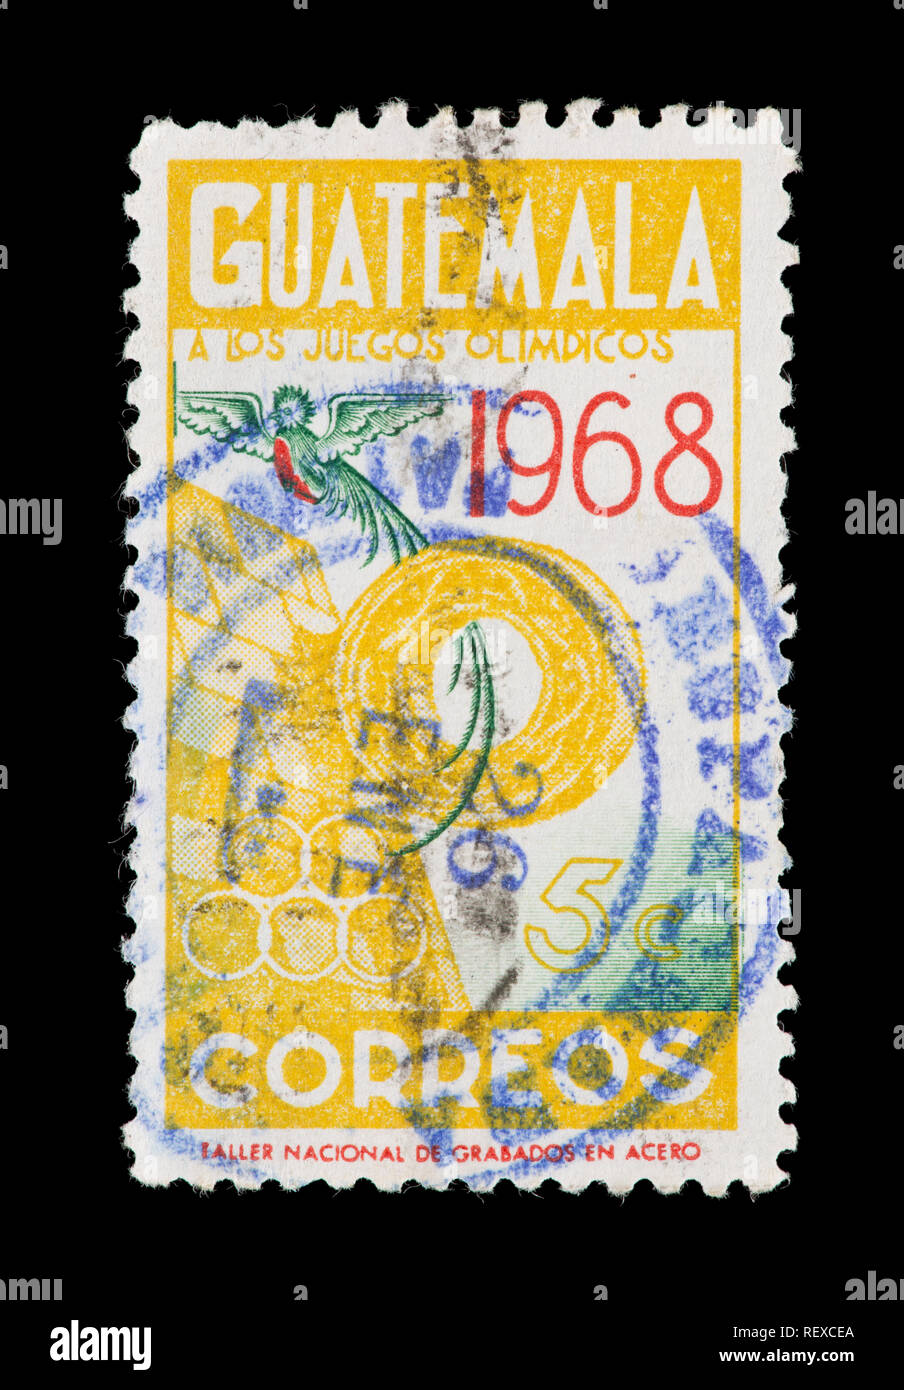 Postage stamp from Guatemala depiciting a quetzal and Mayan ball game goal, overprinted 1968, 50th anniversary of ILO. Stock Photo